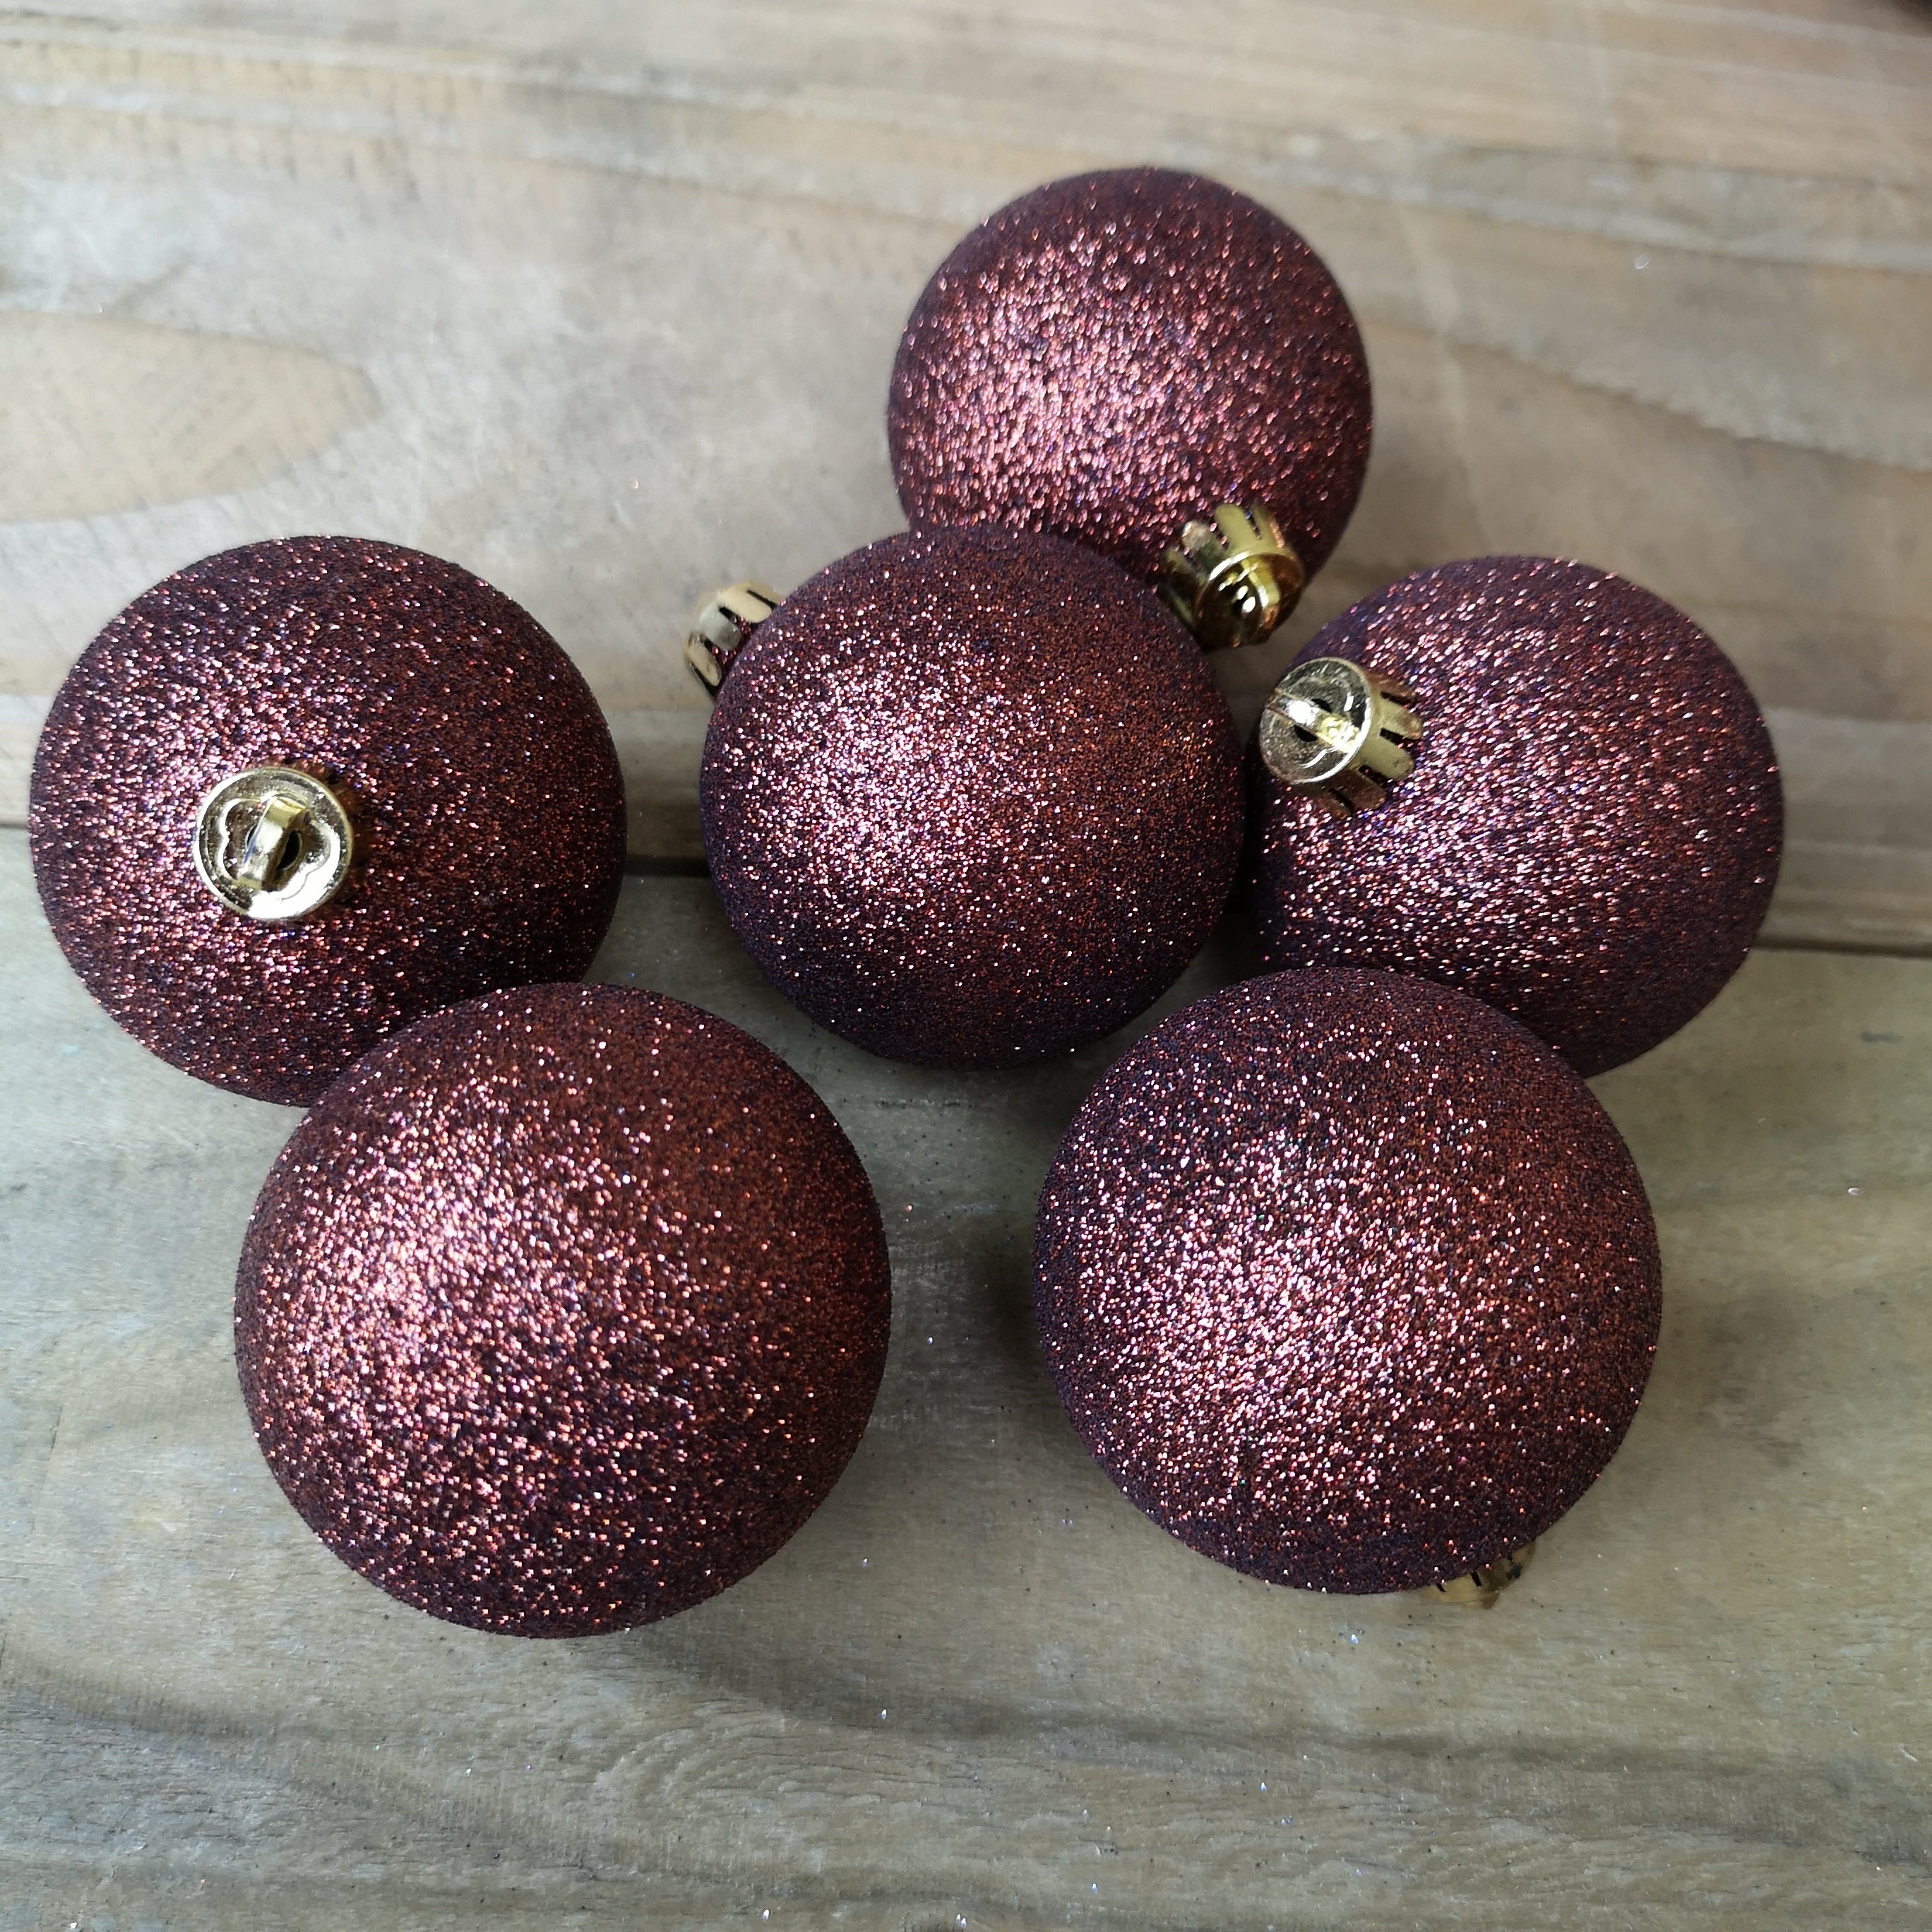 33 Assorted Shatterproof Christmas Baubles With Star Tree Topper - Rosewood Brown